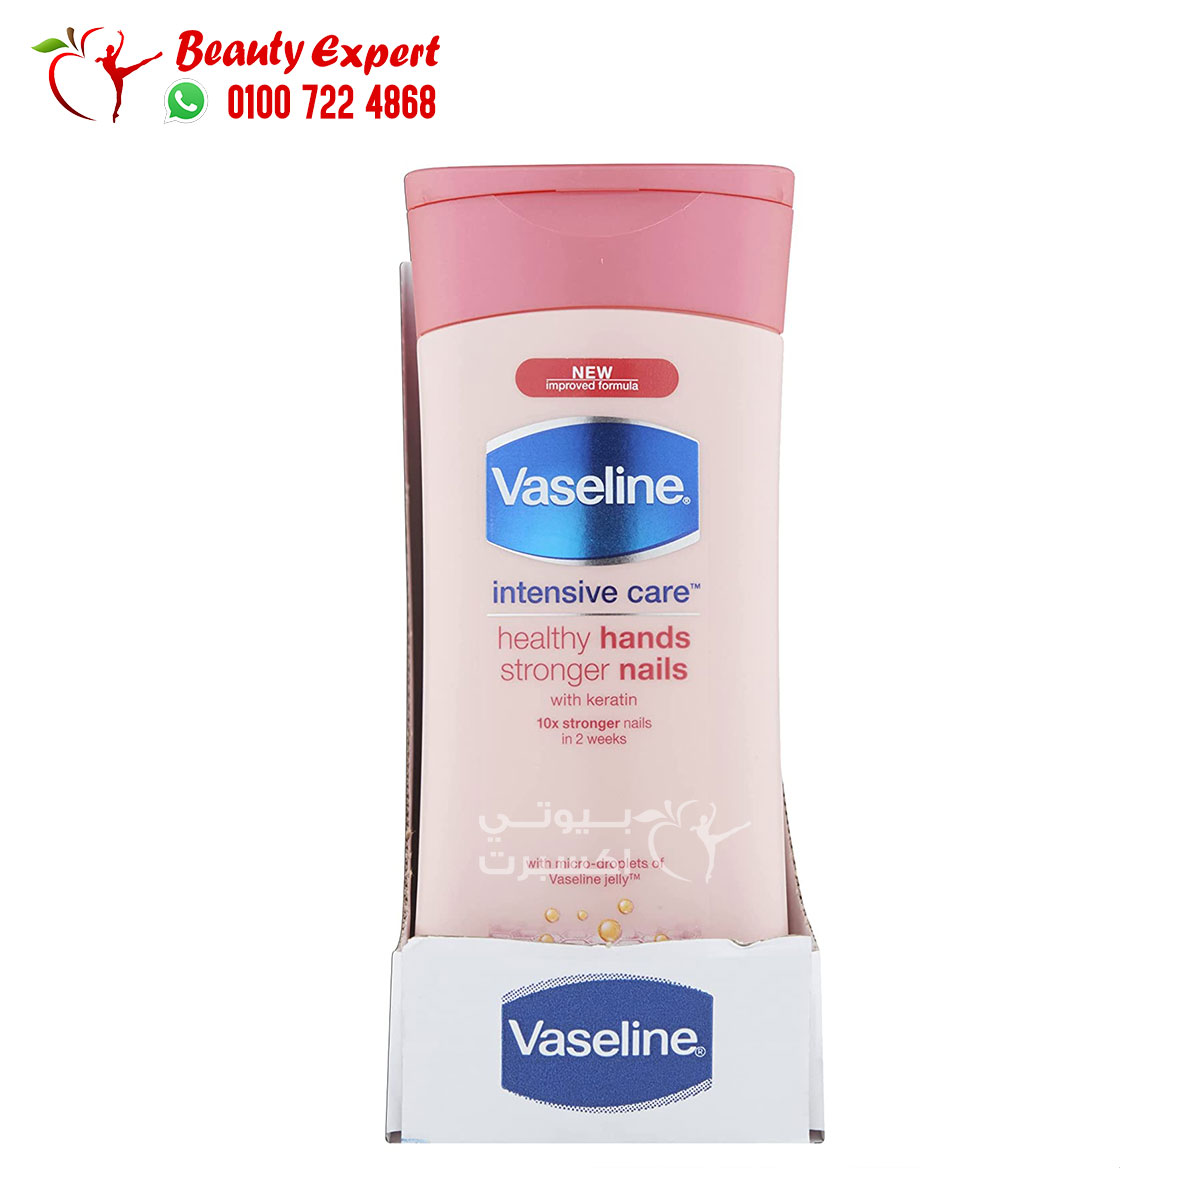 Vaseline Intensive Care Healthy Hands Stronger Nails Conditioning Lotion  reviews in Hand Lotions & Creams - ChickAdvisor